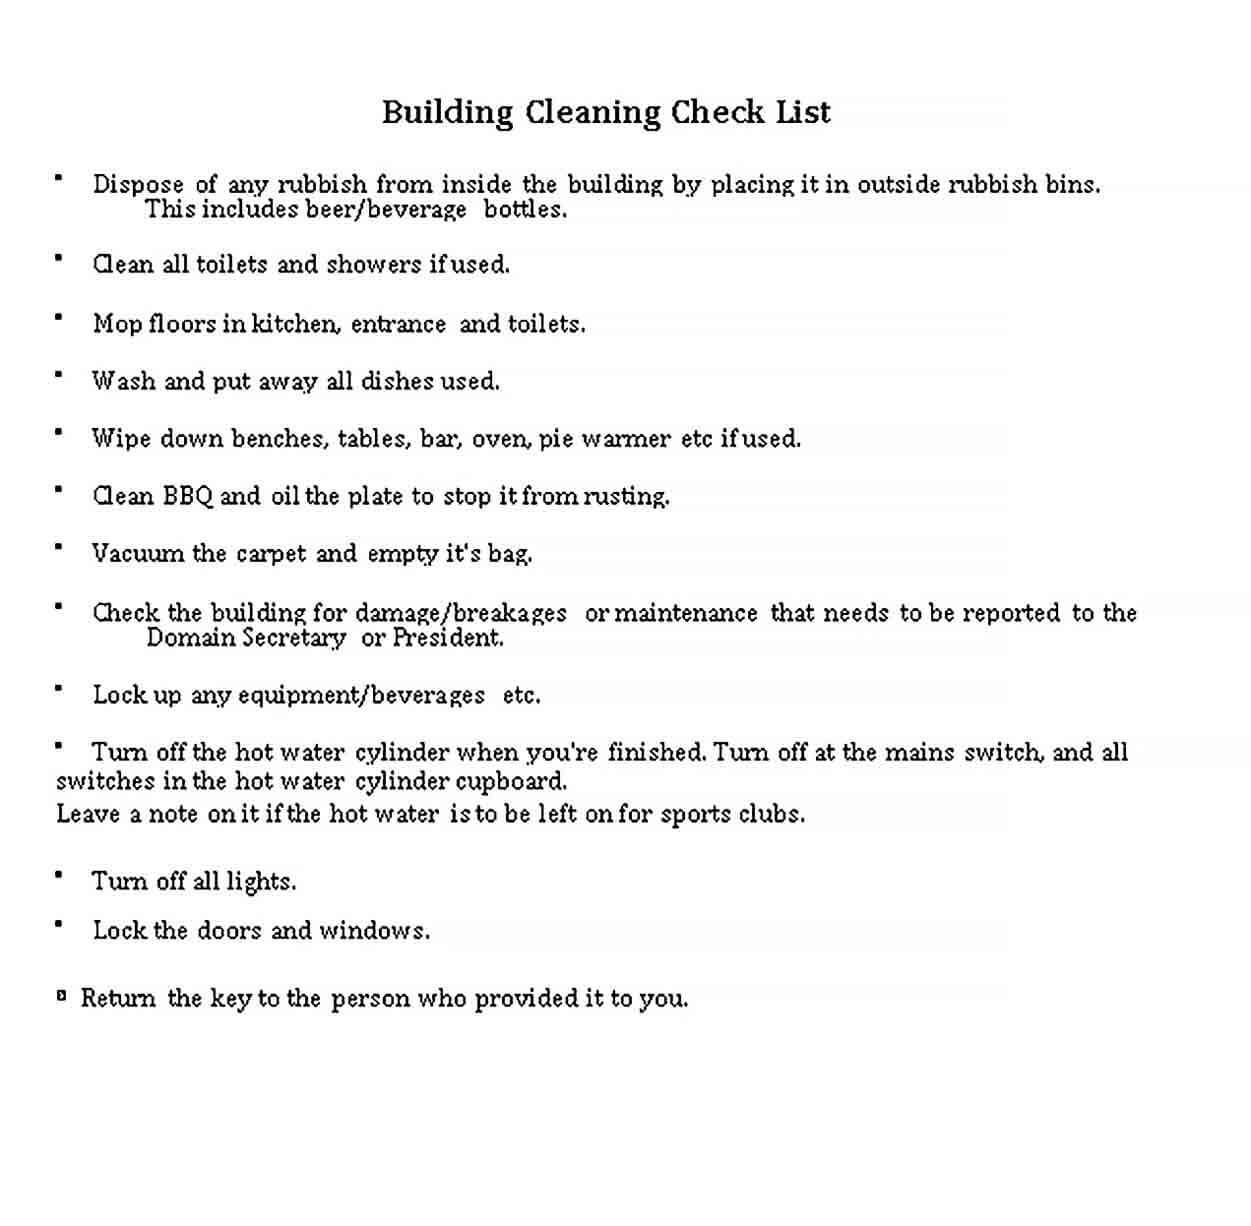 Sample Cleaning Checklist for Building